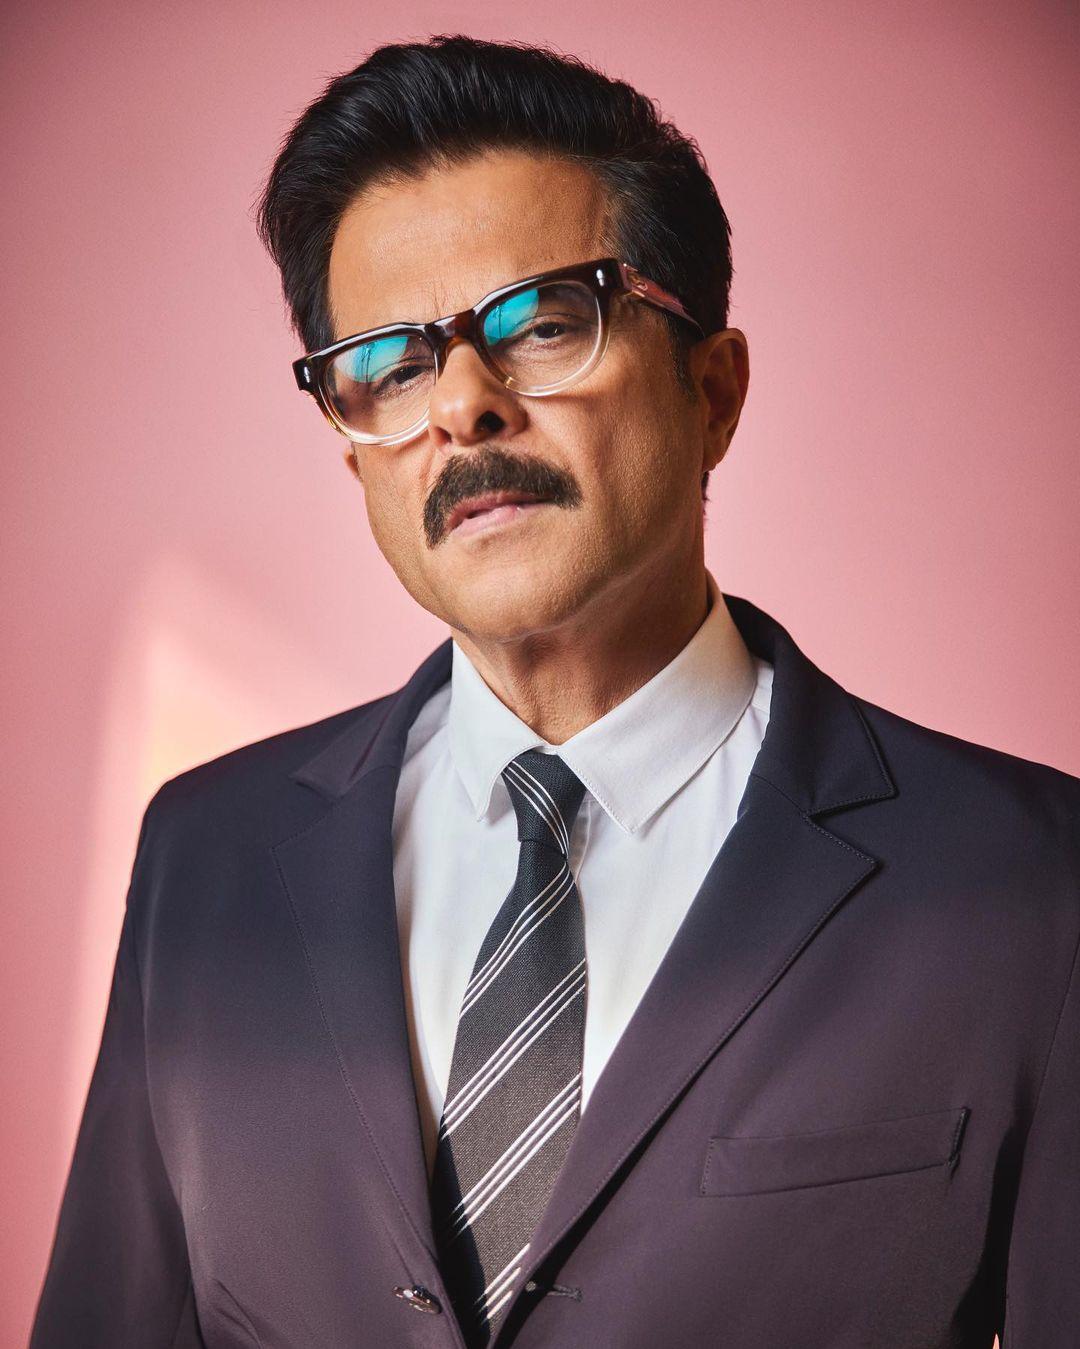 Easily the most recognizable face in the Kapoor family, Anil Kapoor has been a powerhouse in Bollywood for over four decades. From the action-packed '80s with films like Tezaab and Meri Jung to international acclaim in Slumdog Millionaire and Mission: Impossible – Ghost Protocol, Anil's career is a saga of reinvention and enduring talent. His family includes his wife Sunita Bhavnani, daughters Sonam Kapoor and Rhea Kapoor, and son Harshvardhan Kapoor.